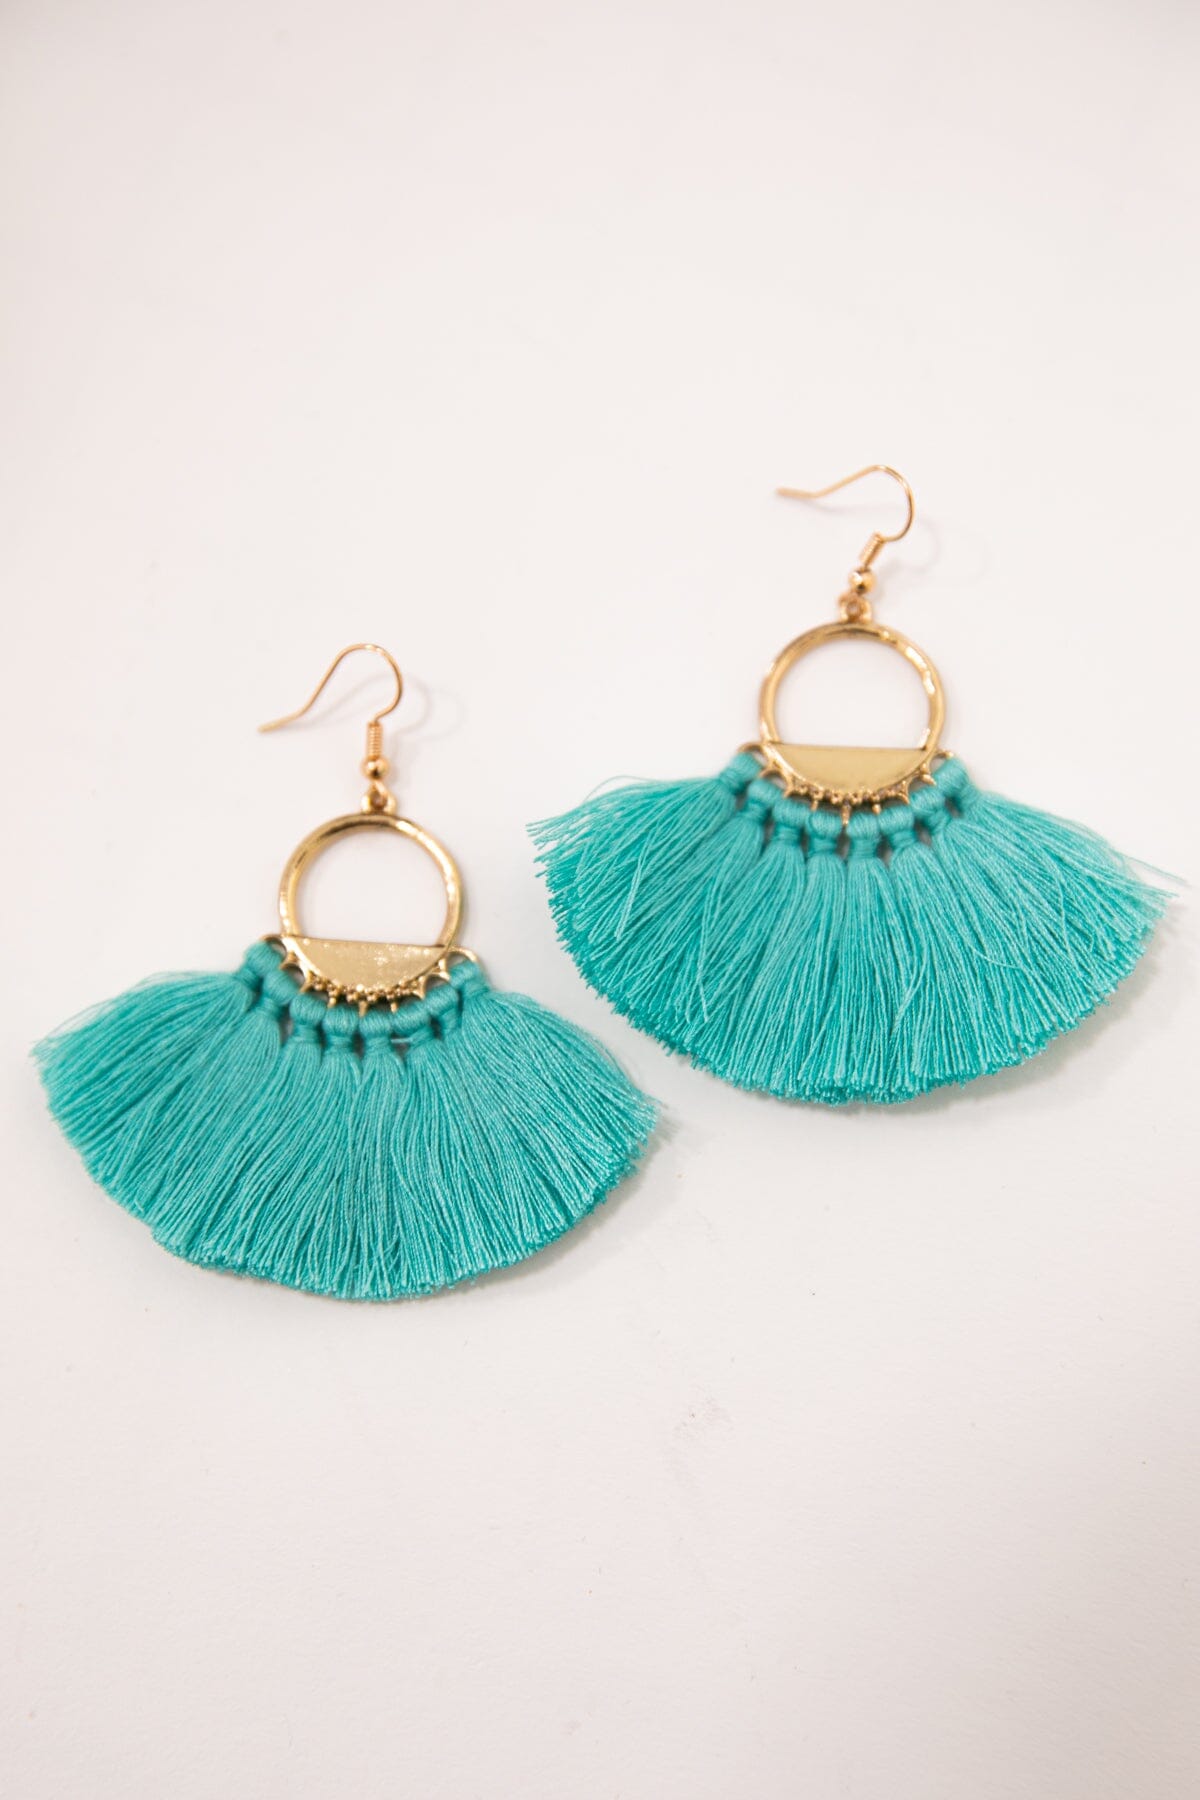 Suede Fringe Earrings | Beatrixbell Handcrafted Jewelry – Beatrixbell  Handcrafted Jewelry + Gift